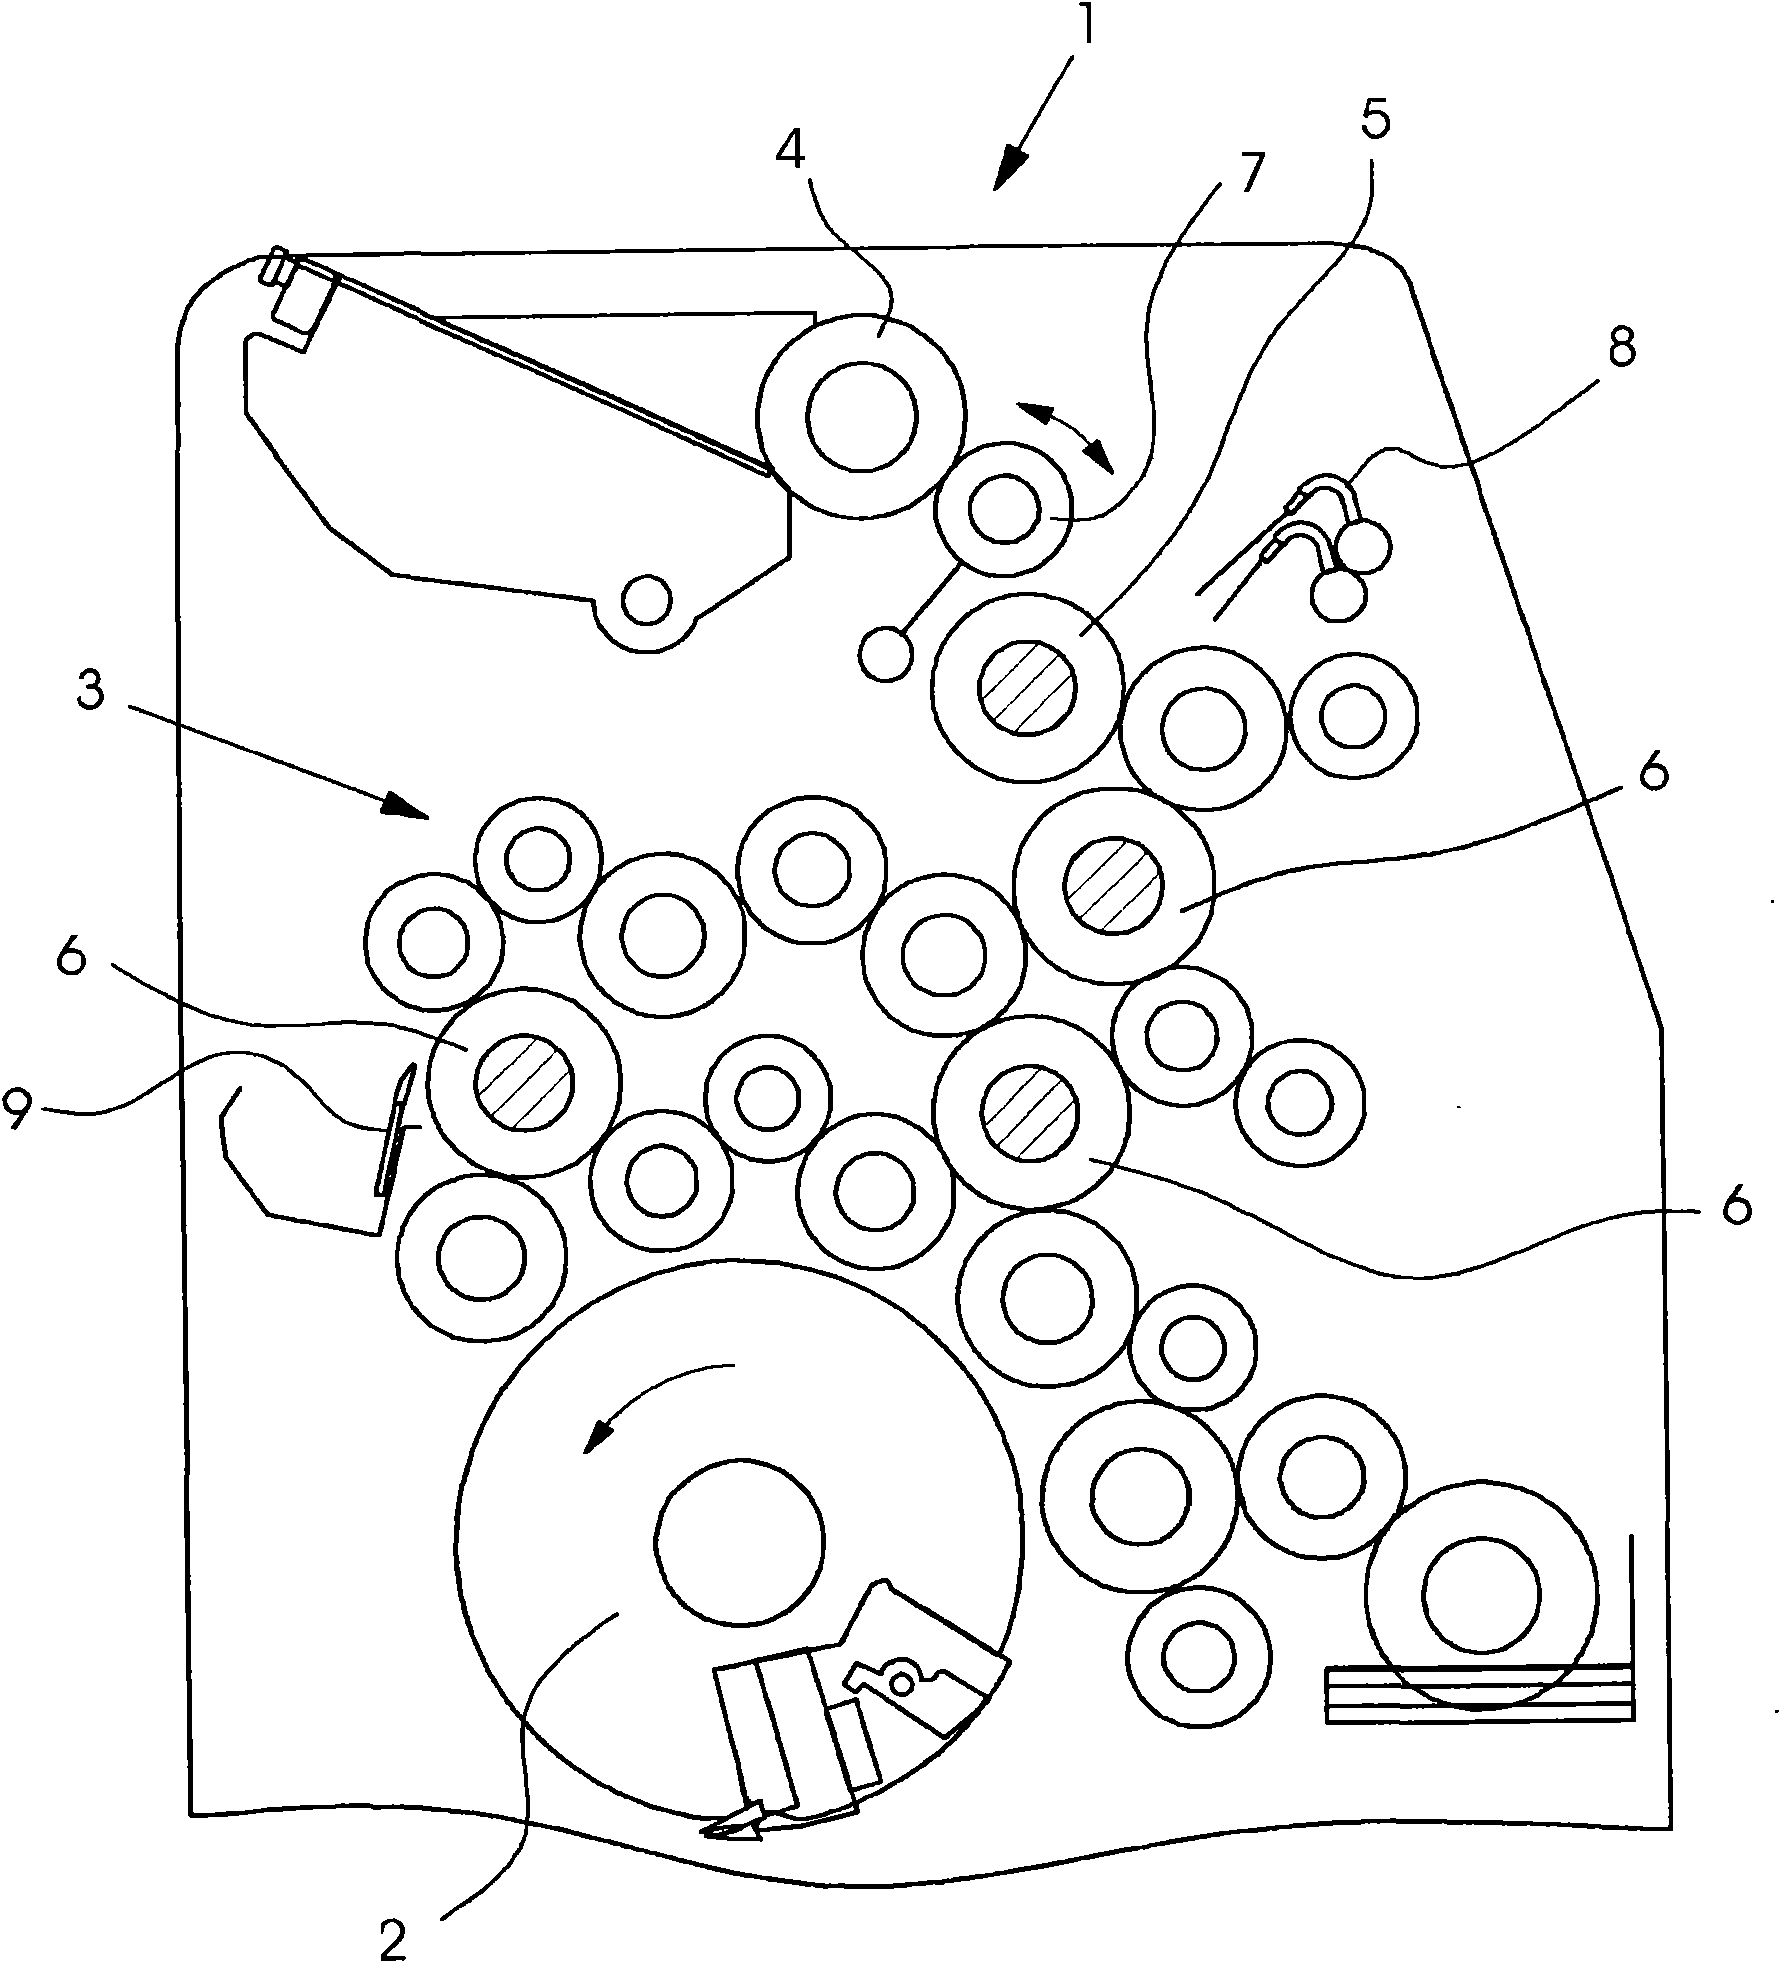 Method for operating a printing press